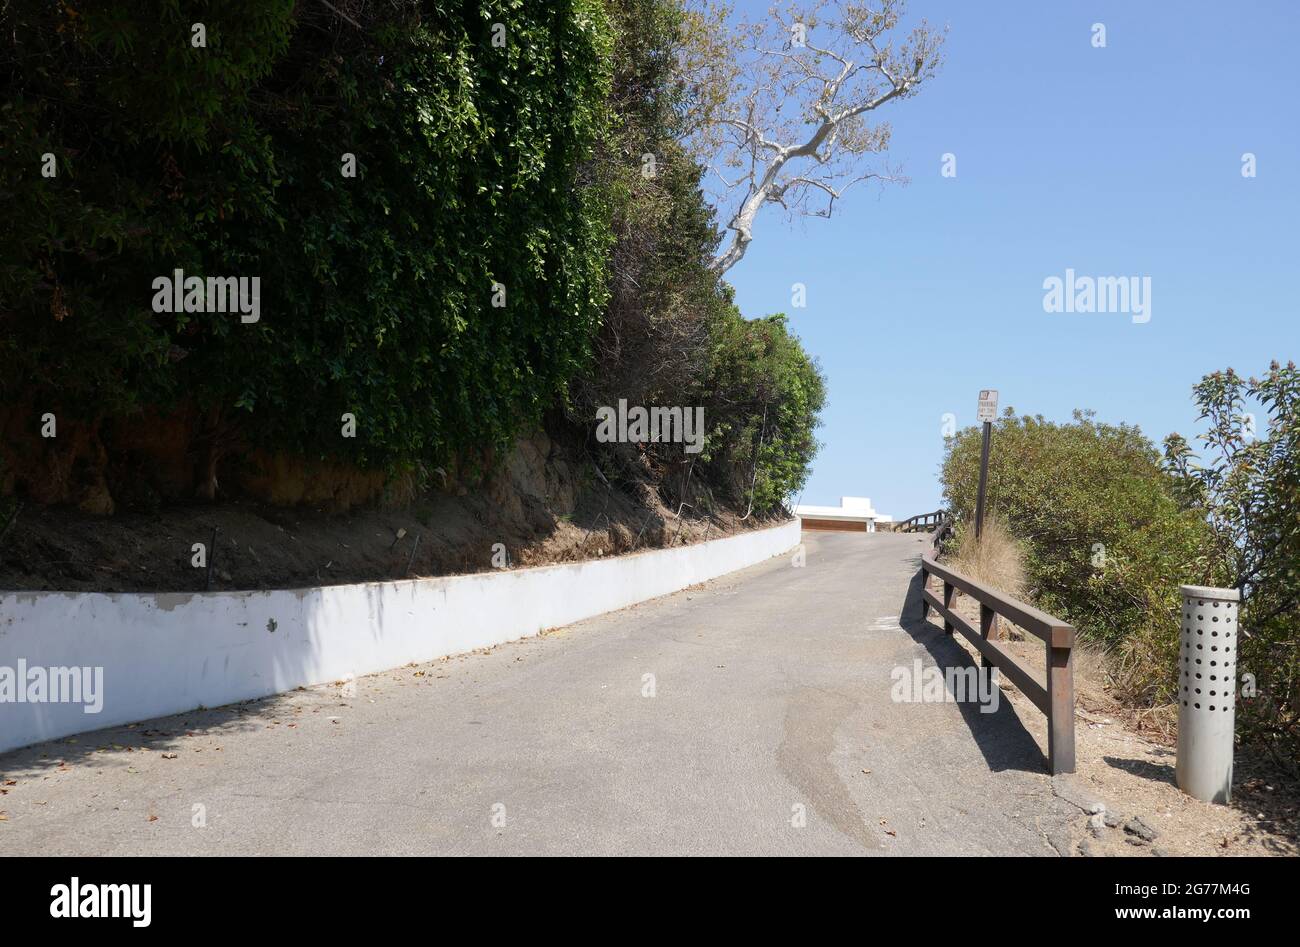 Los Angeles, California, USA 11th July 2021 A general view of atmosphere of Actress/Director Ida Lupino's Former Home/house on July 11, 2021 in Los Angeles, California, USA. Photo by Barry King/Alamy Stock Photo Stock Photo